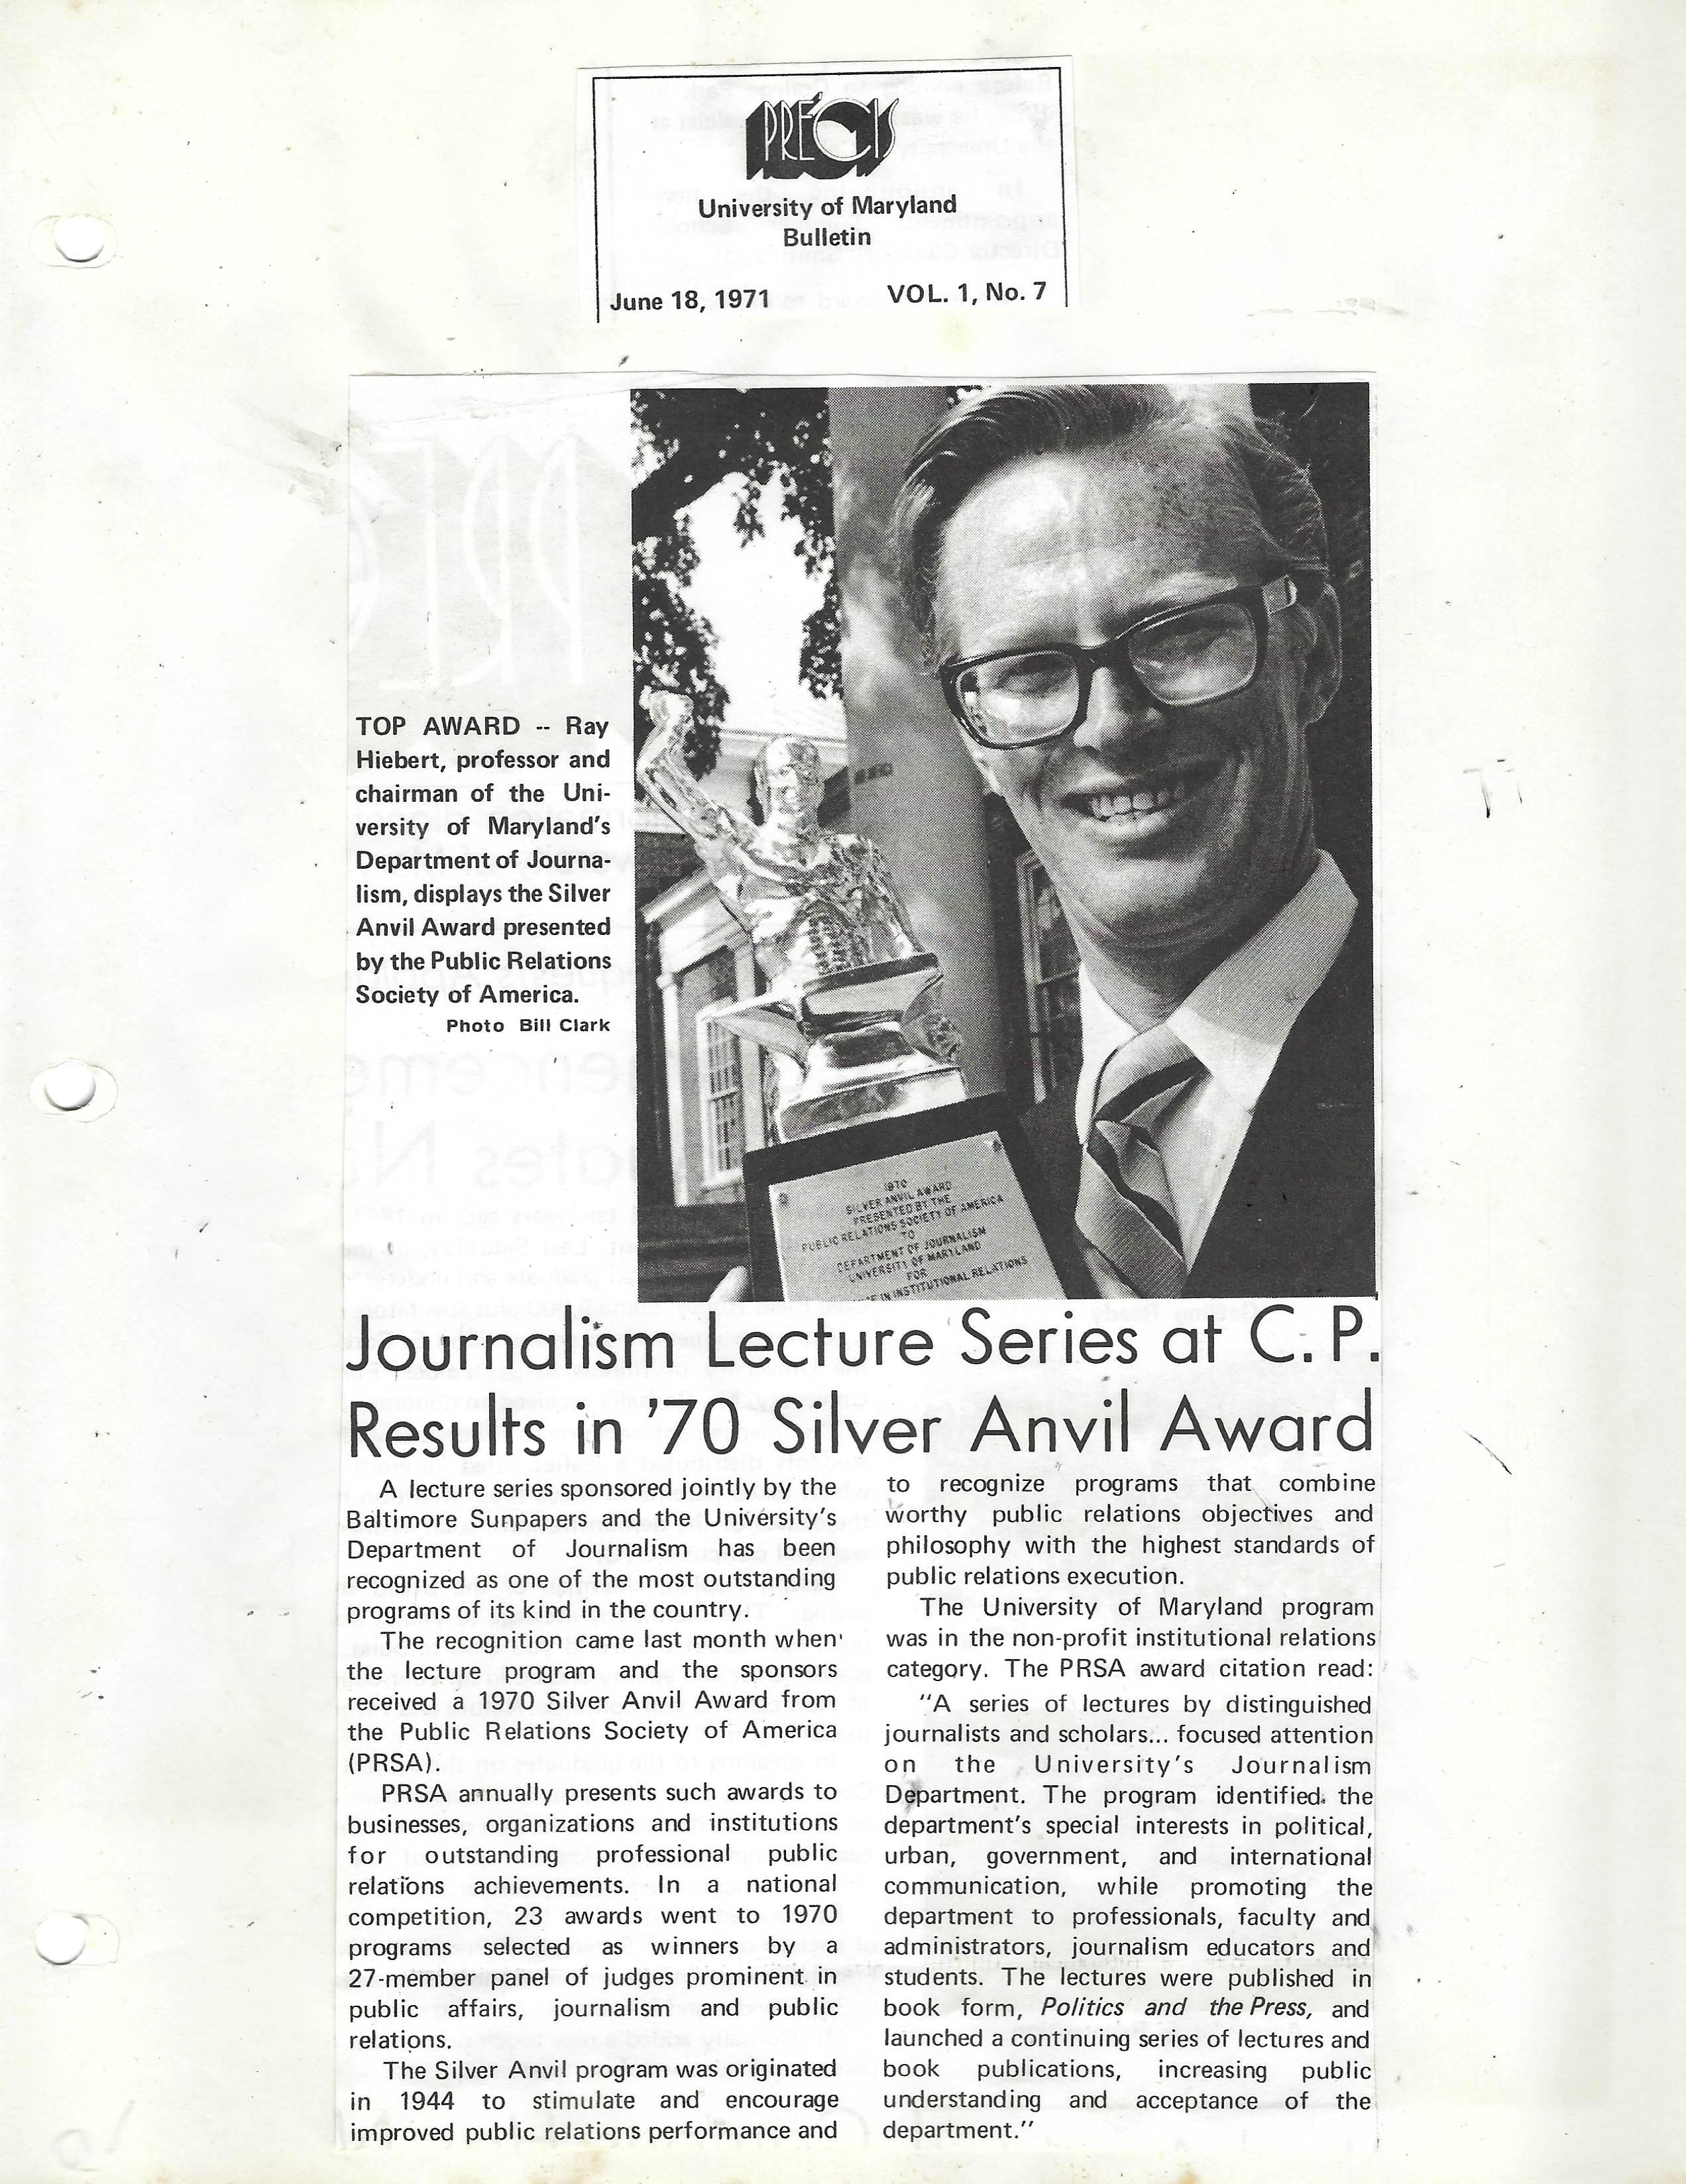 Ray Hiebert wins Silver Anvil Award in 1970